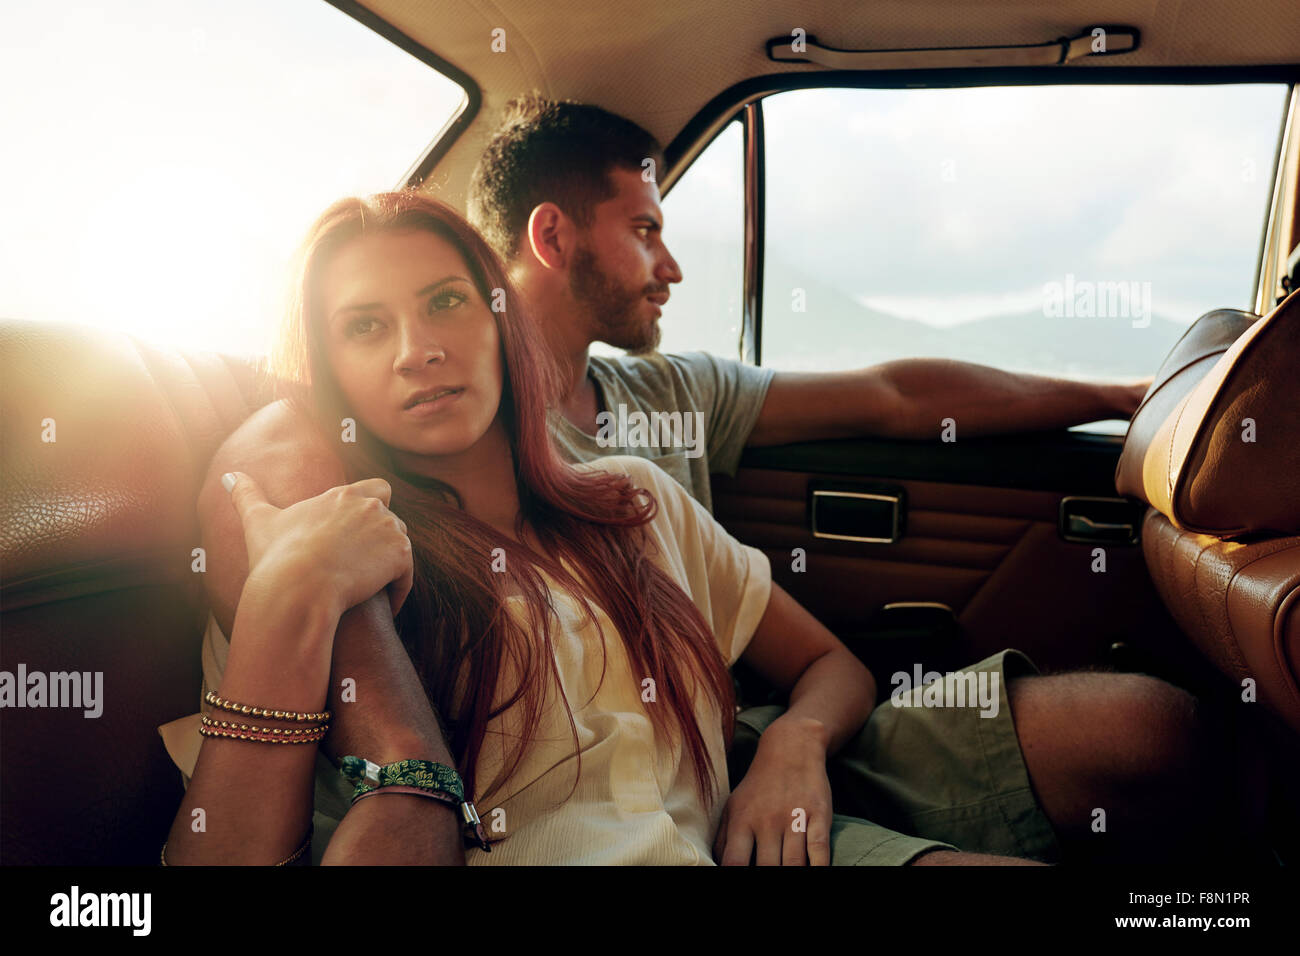 Shot of young woman with her boyfriend sitting on back seat of a car going on road trip. Couple in rear seat of vehicle. Stock Photo